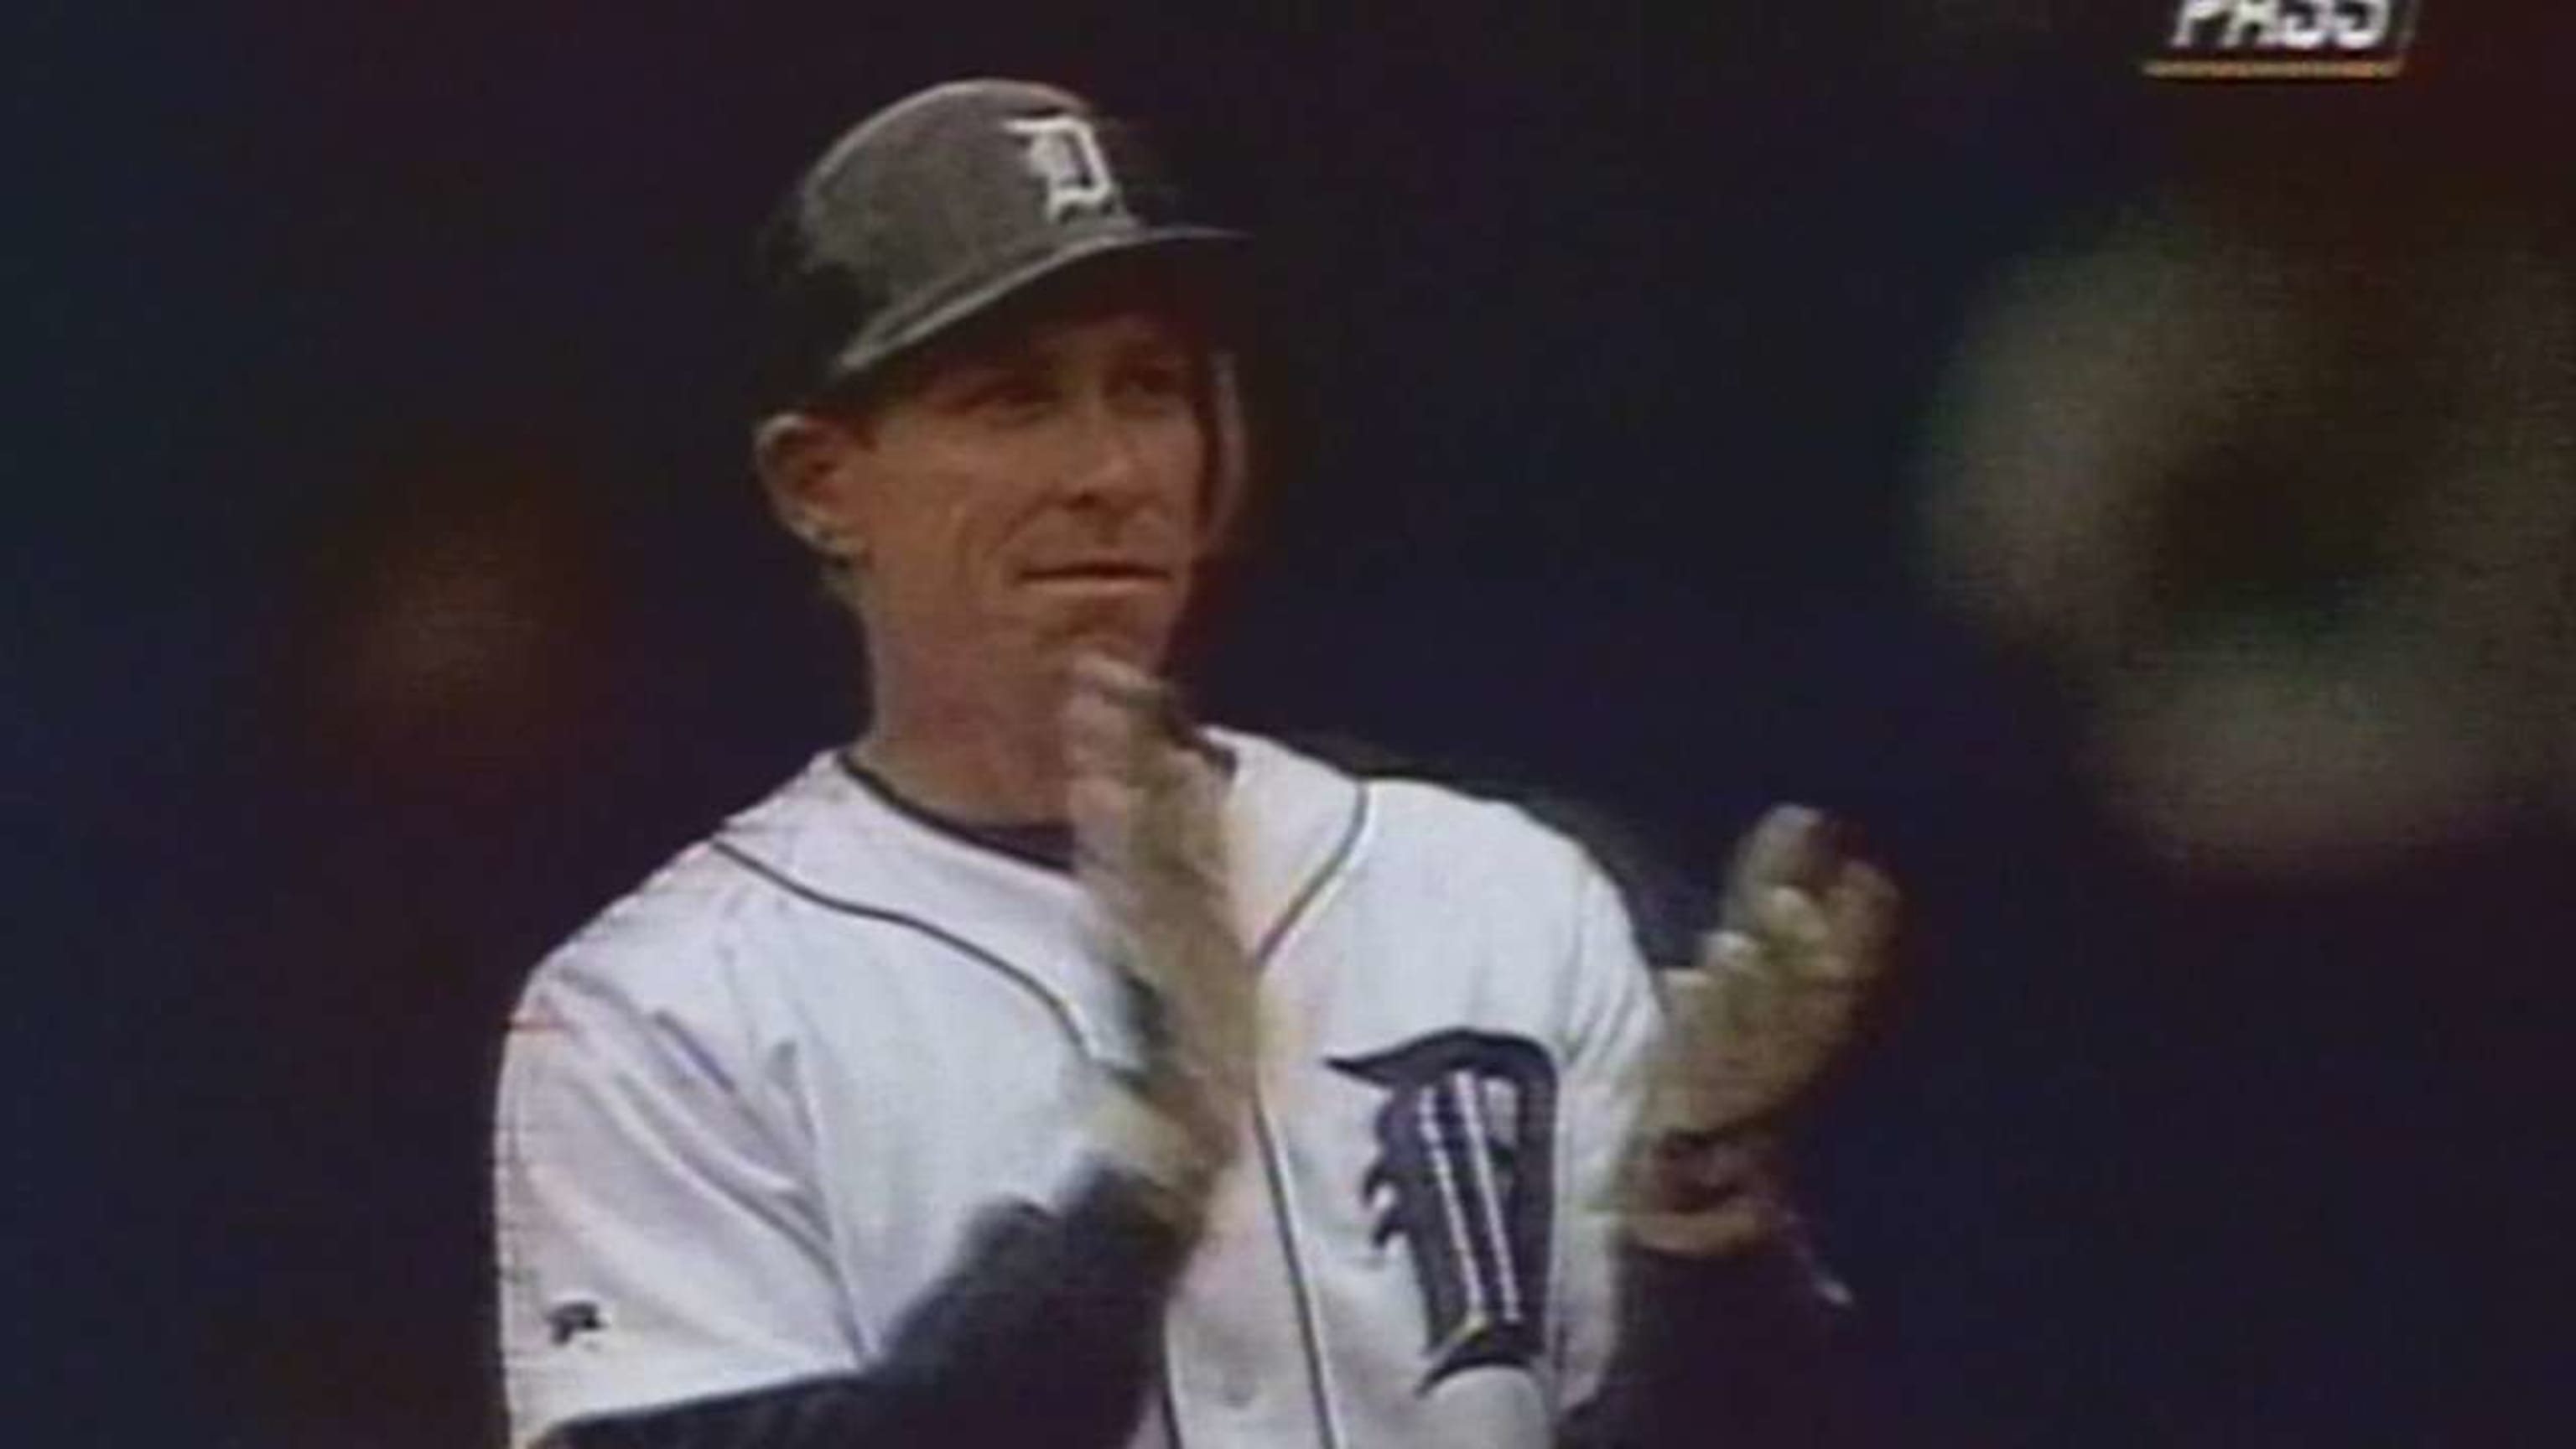 Alan Trammell's eternal youth is influencing the next generation of Tigers  - The Athletic